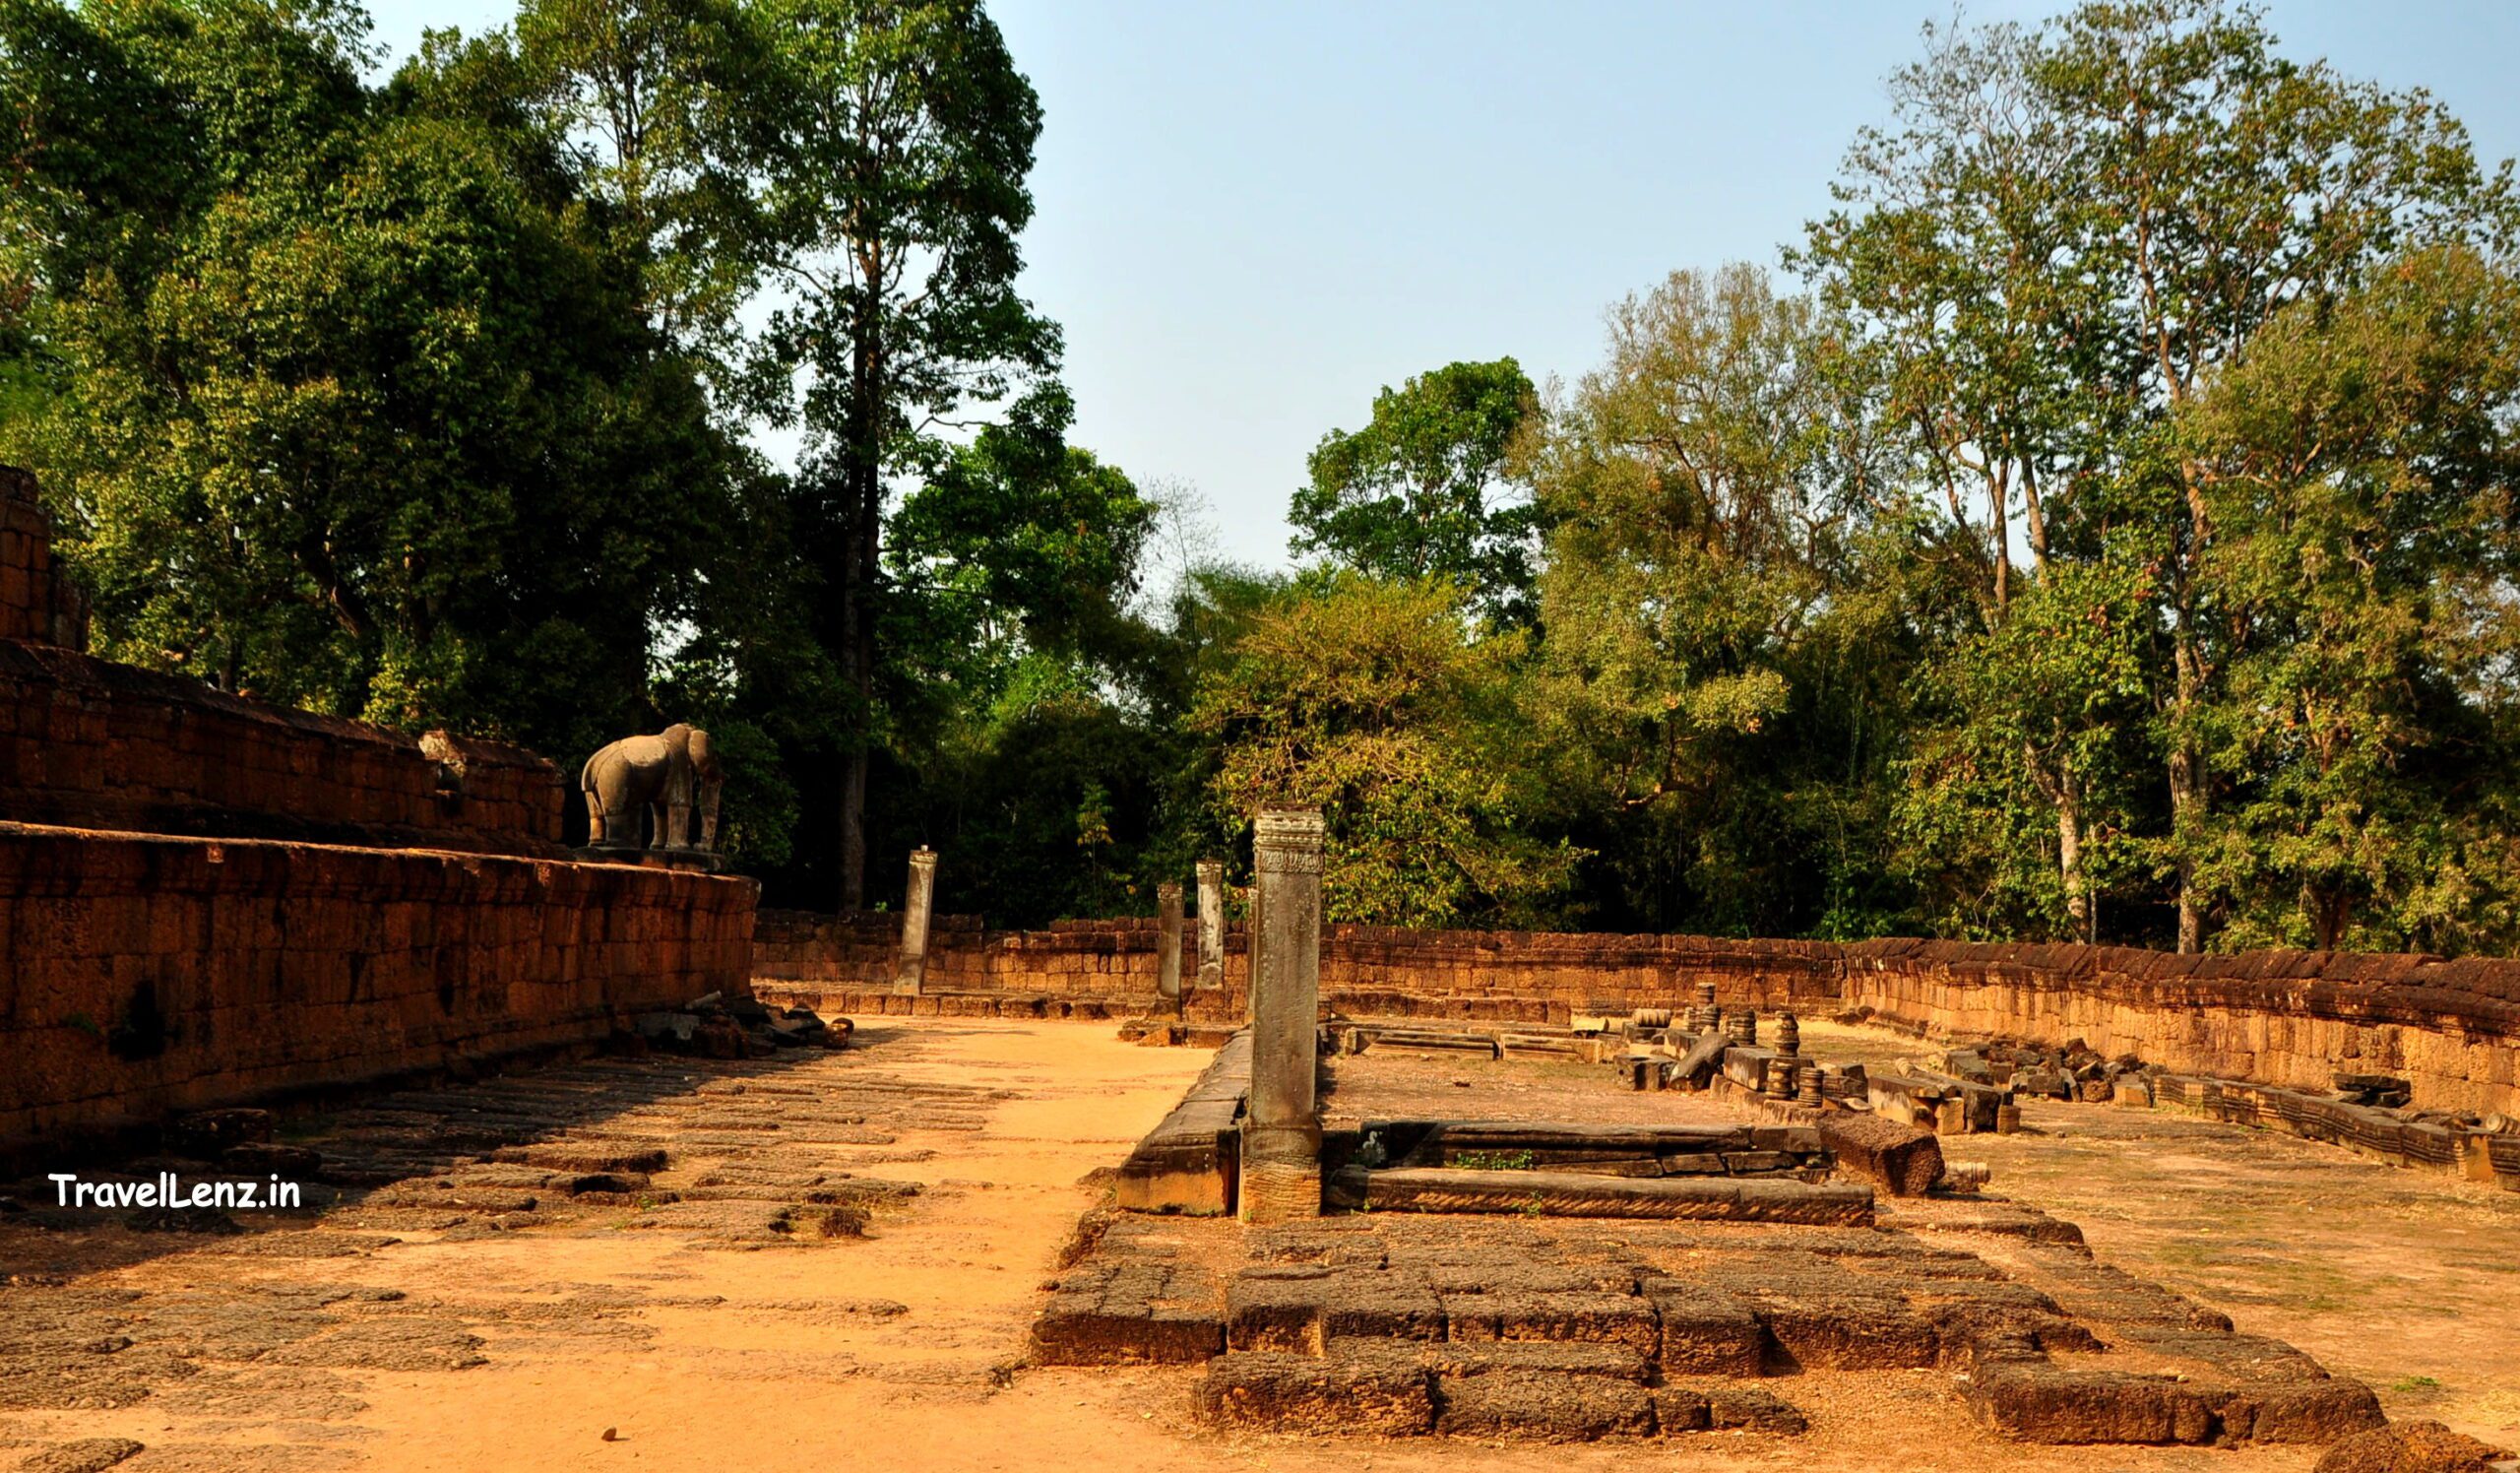 Guardian elephants stand guard at East Mebon